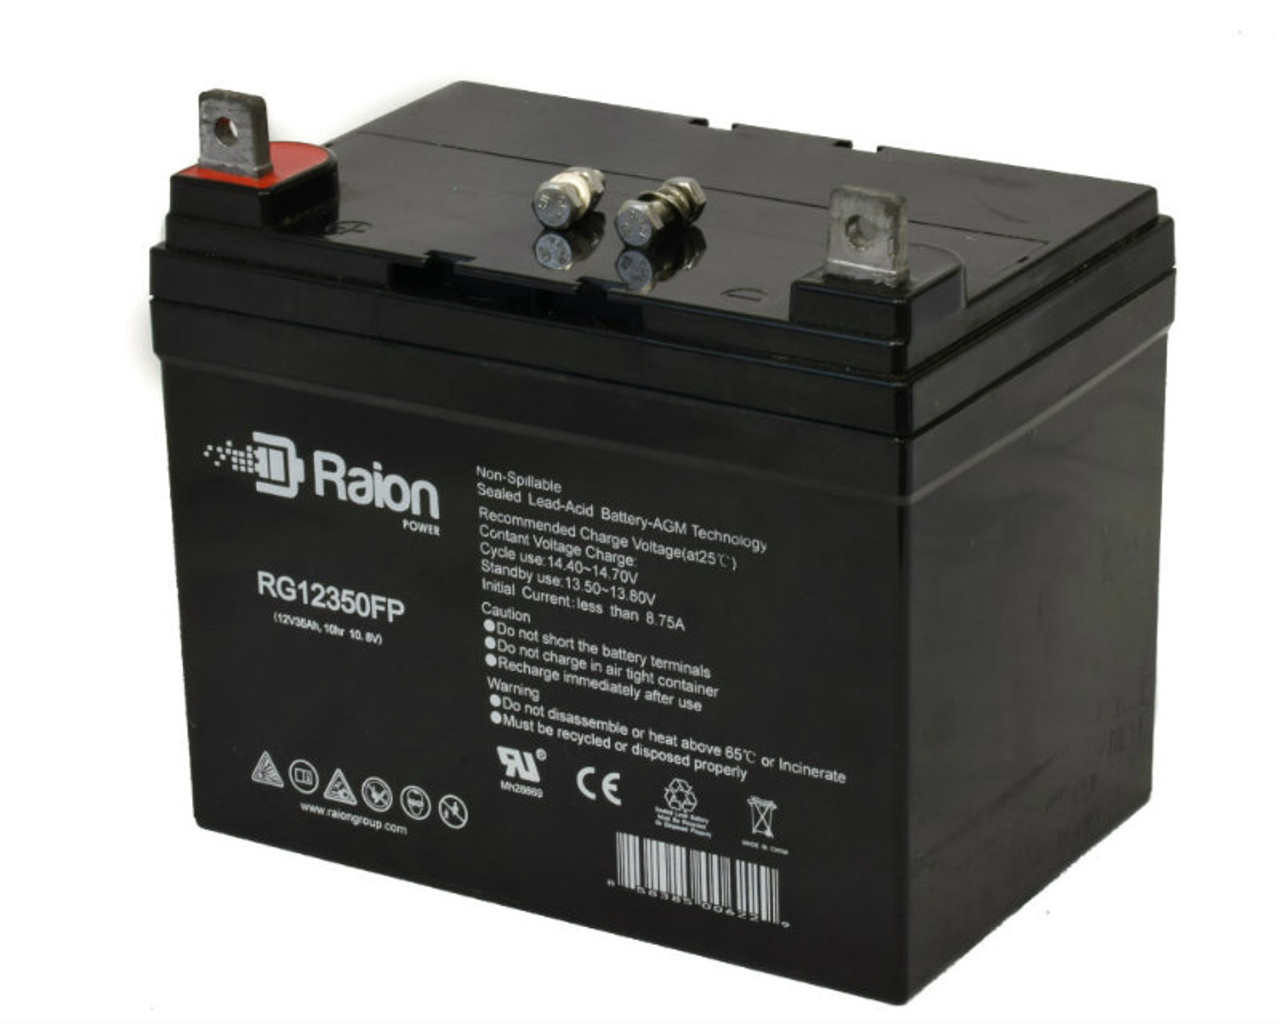 Raion Power Replacement 12V 35Ah RG12350FP Mobility Scooter Battery for Bruno Merits Travel-Ease Power chairs MP1IA